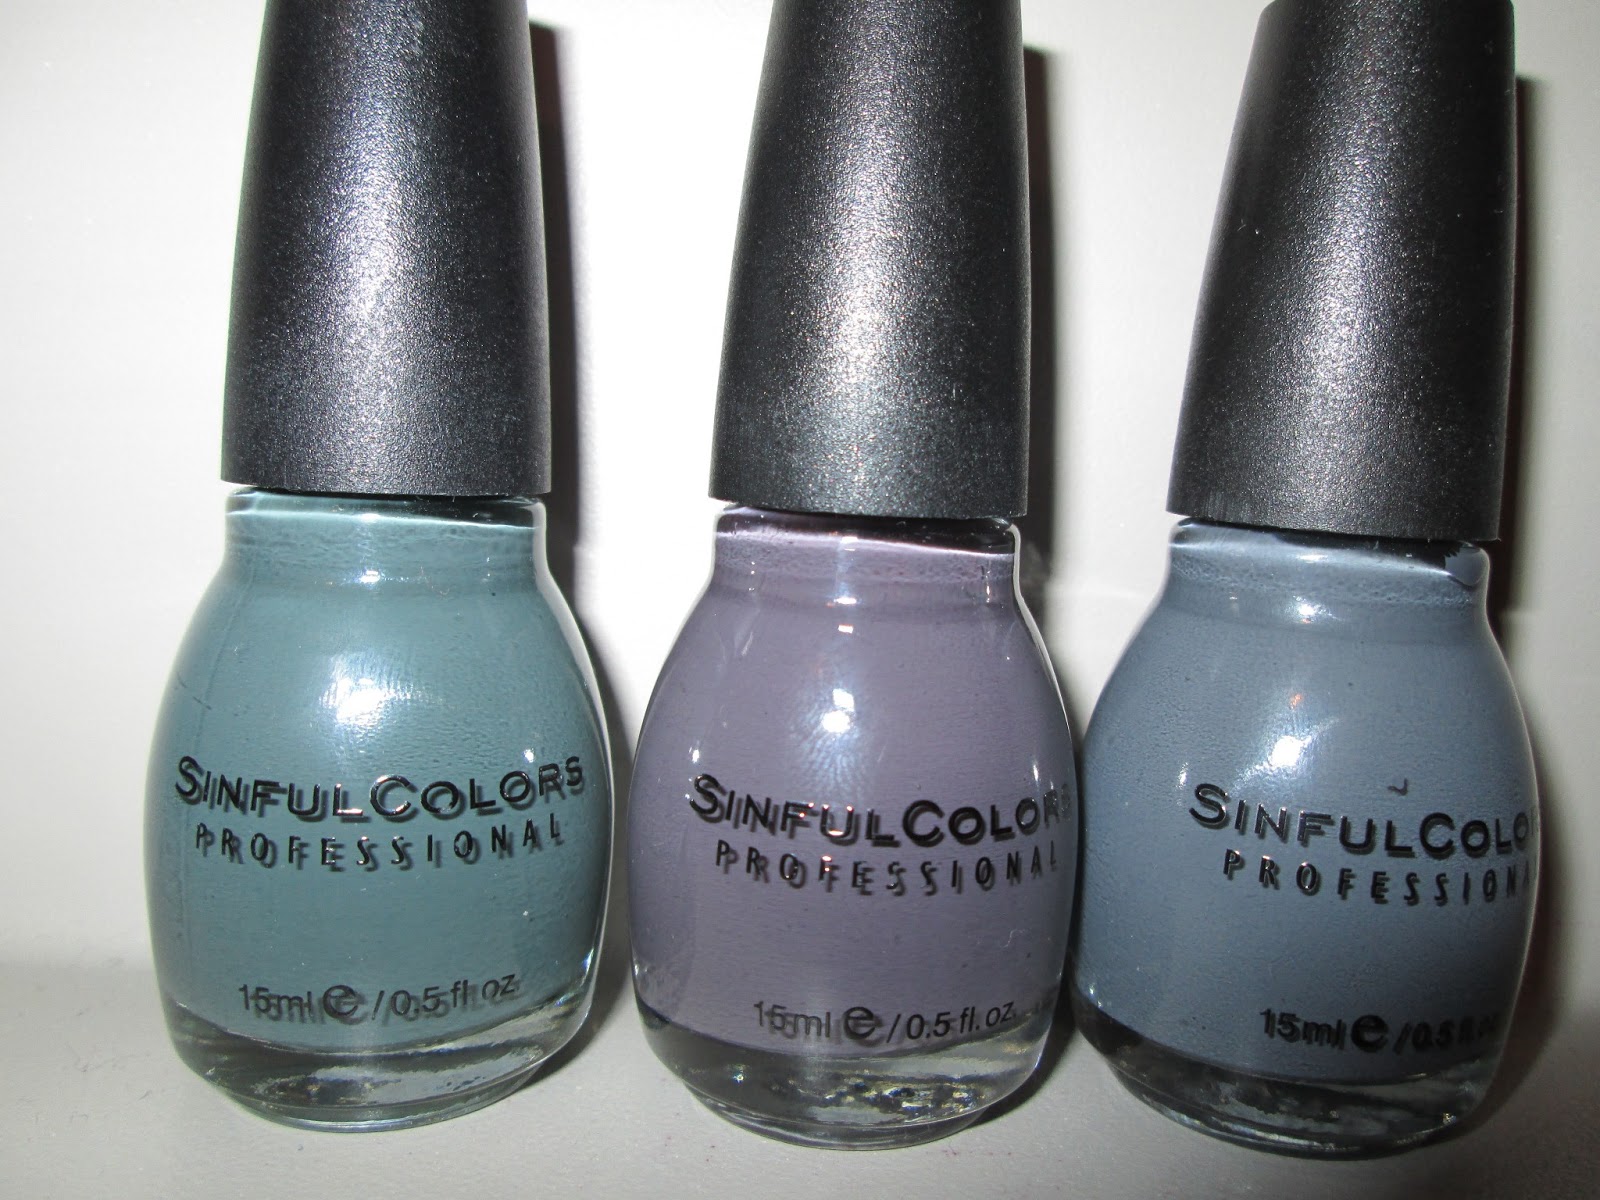 4. Sinful Colors Professional Nail Polish - Pearls - wide 9